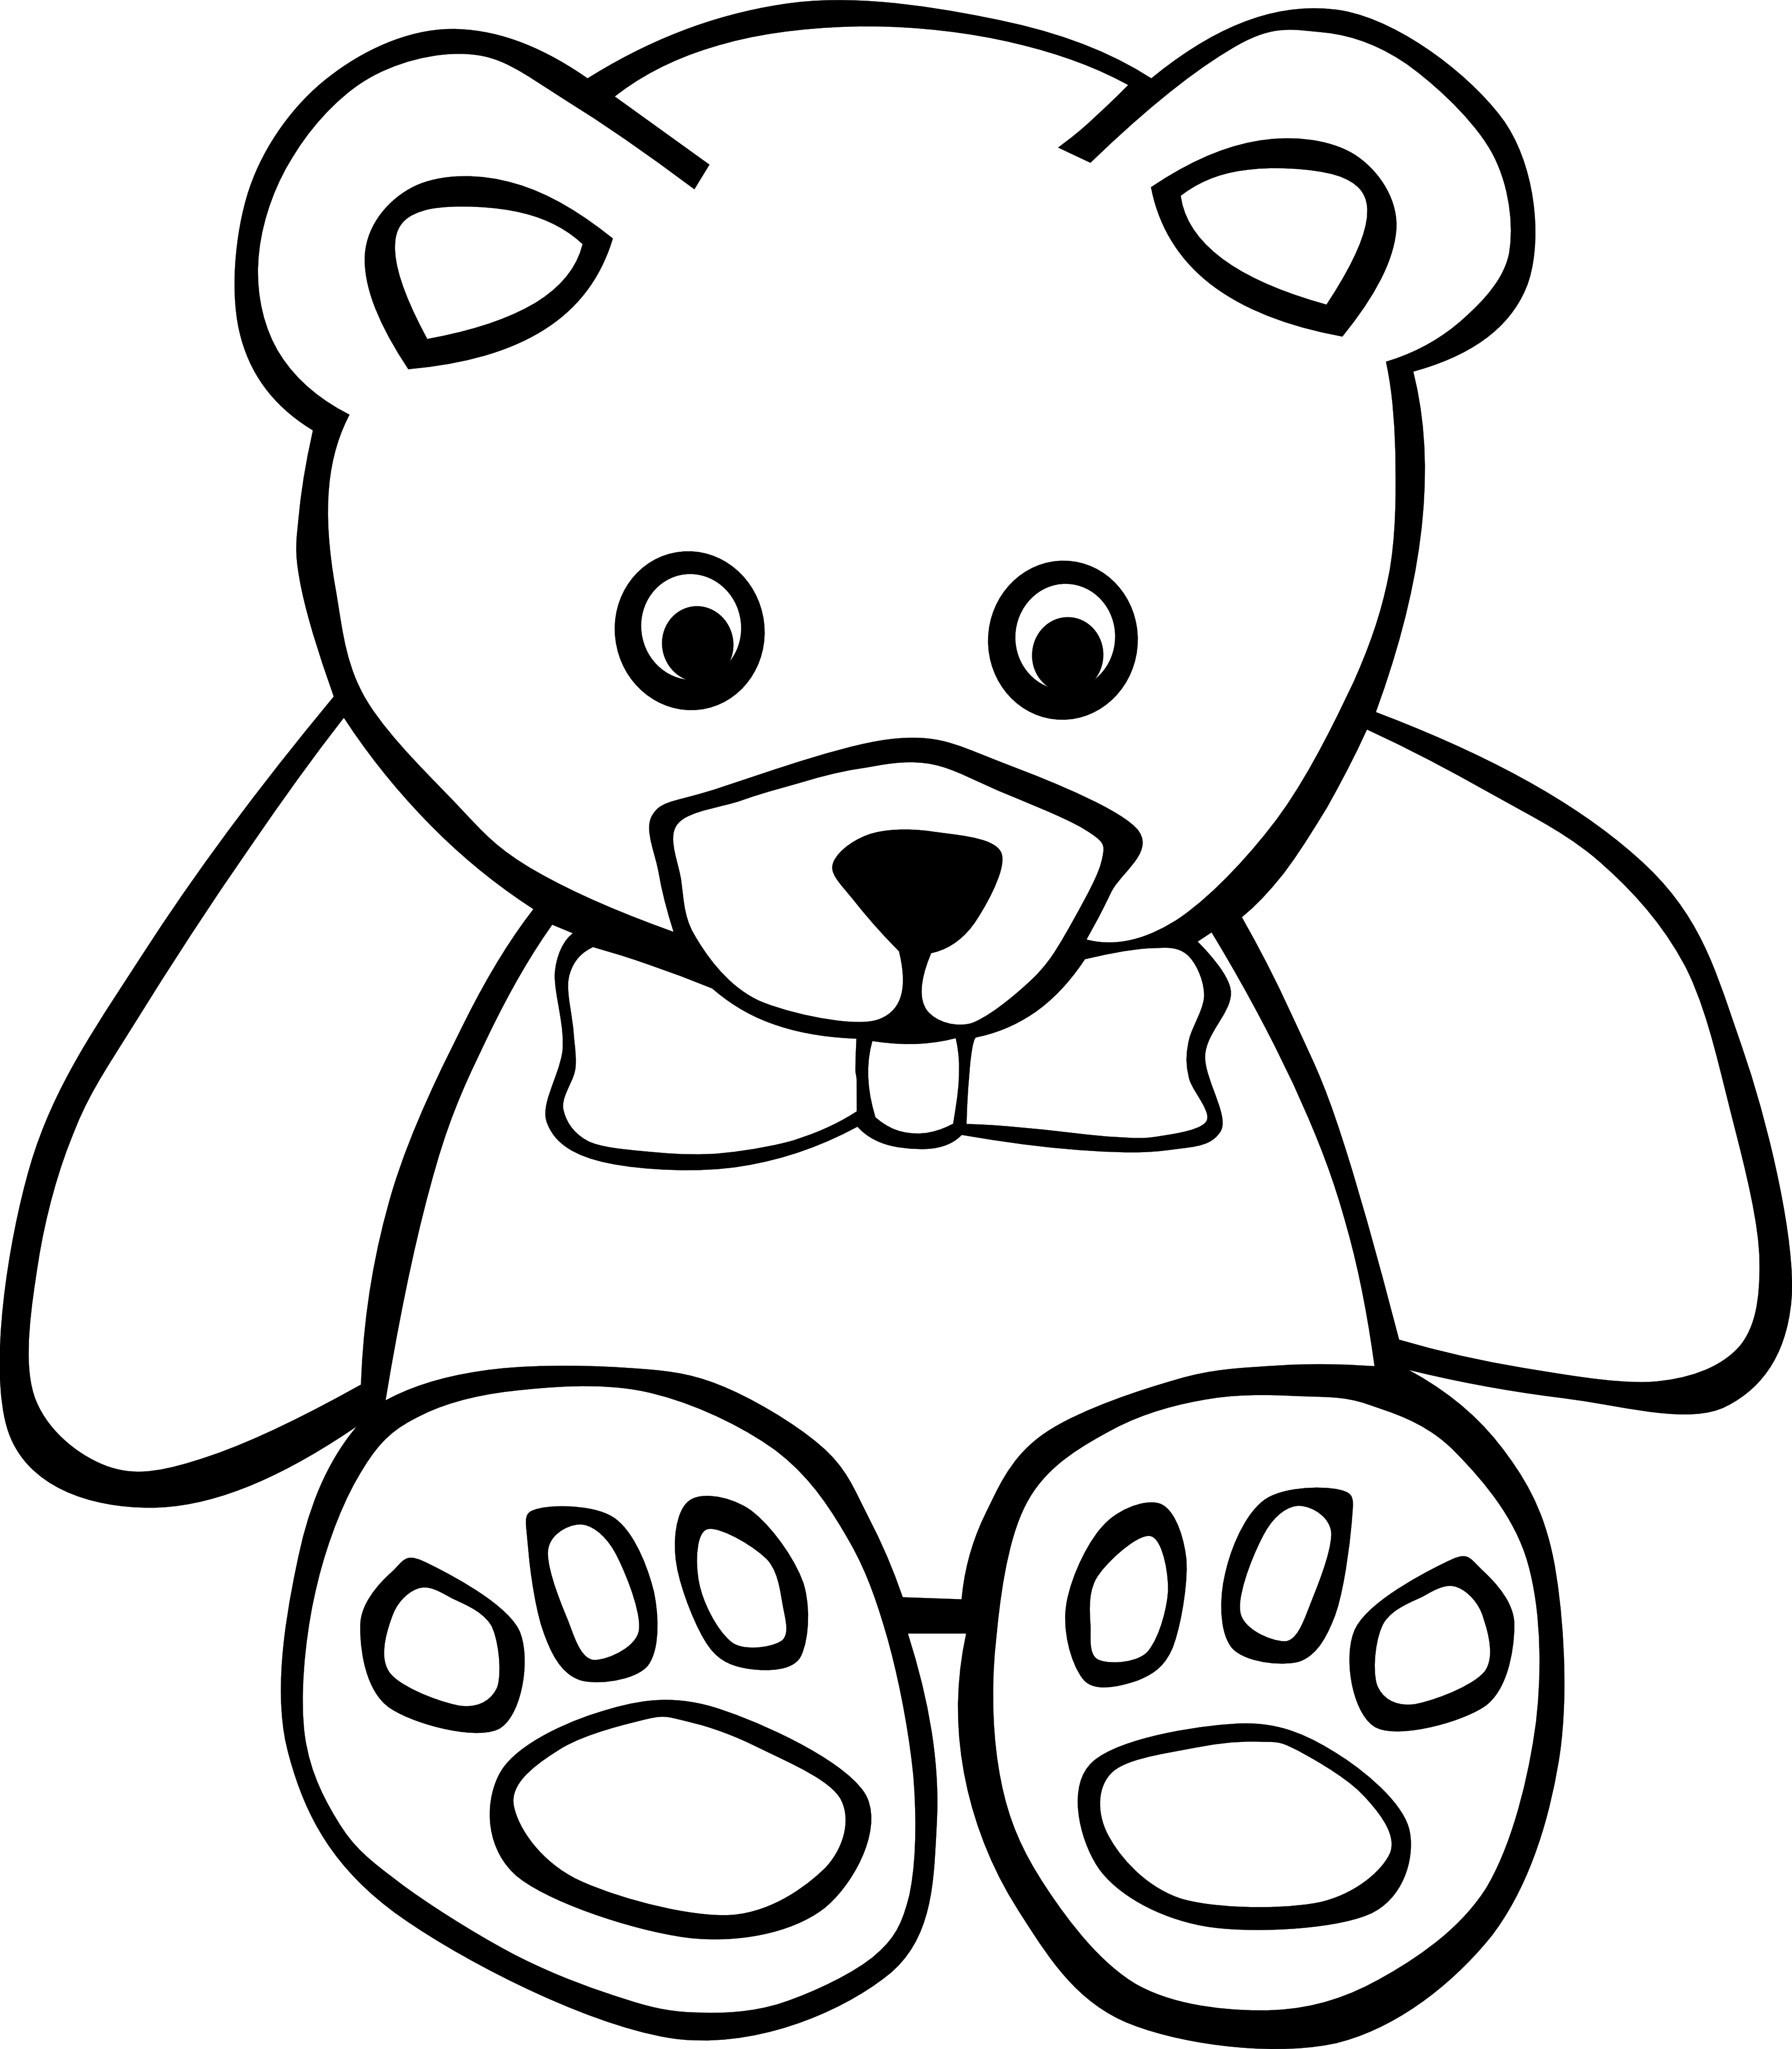 Easy Teddy Bear Coloring Book Pages | Drawing and Coloring for Kids